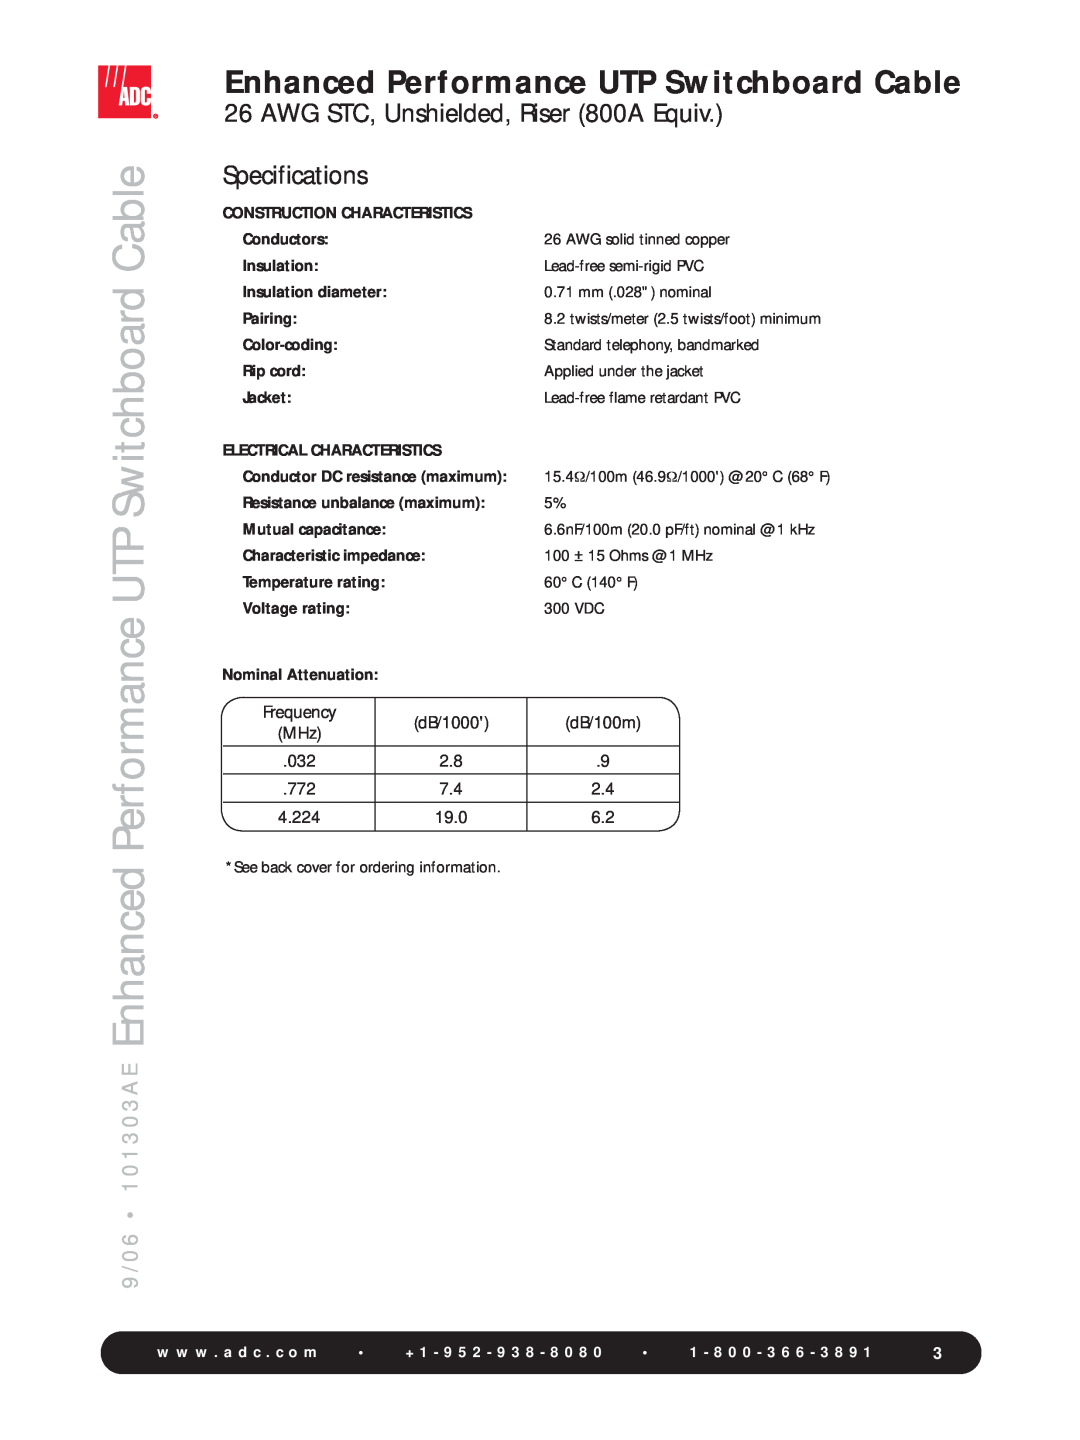 ADC manual 9 / 0 6 1 0 1 3 0 3 A E Enhanced Performance UTP Switchboard Cable, Specifications, w w w . a d c . c o m 